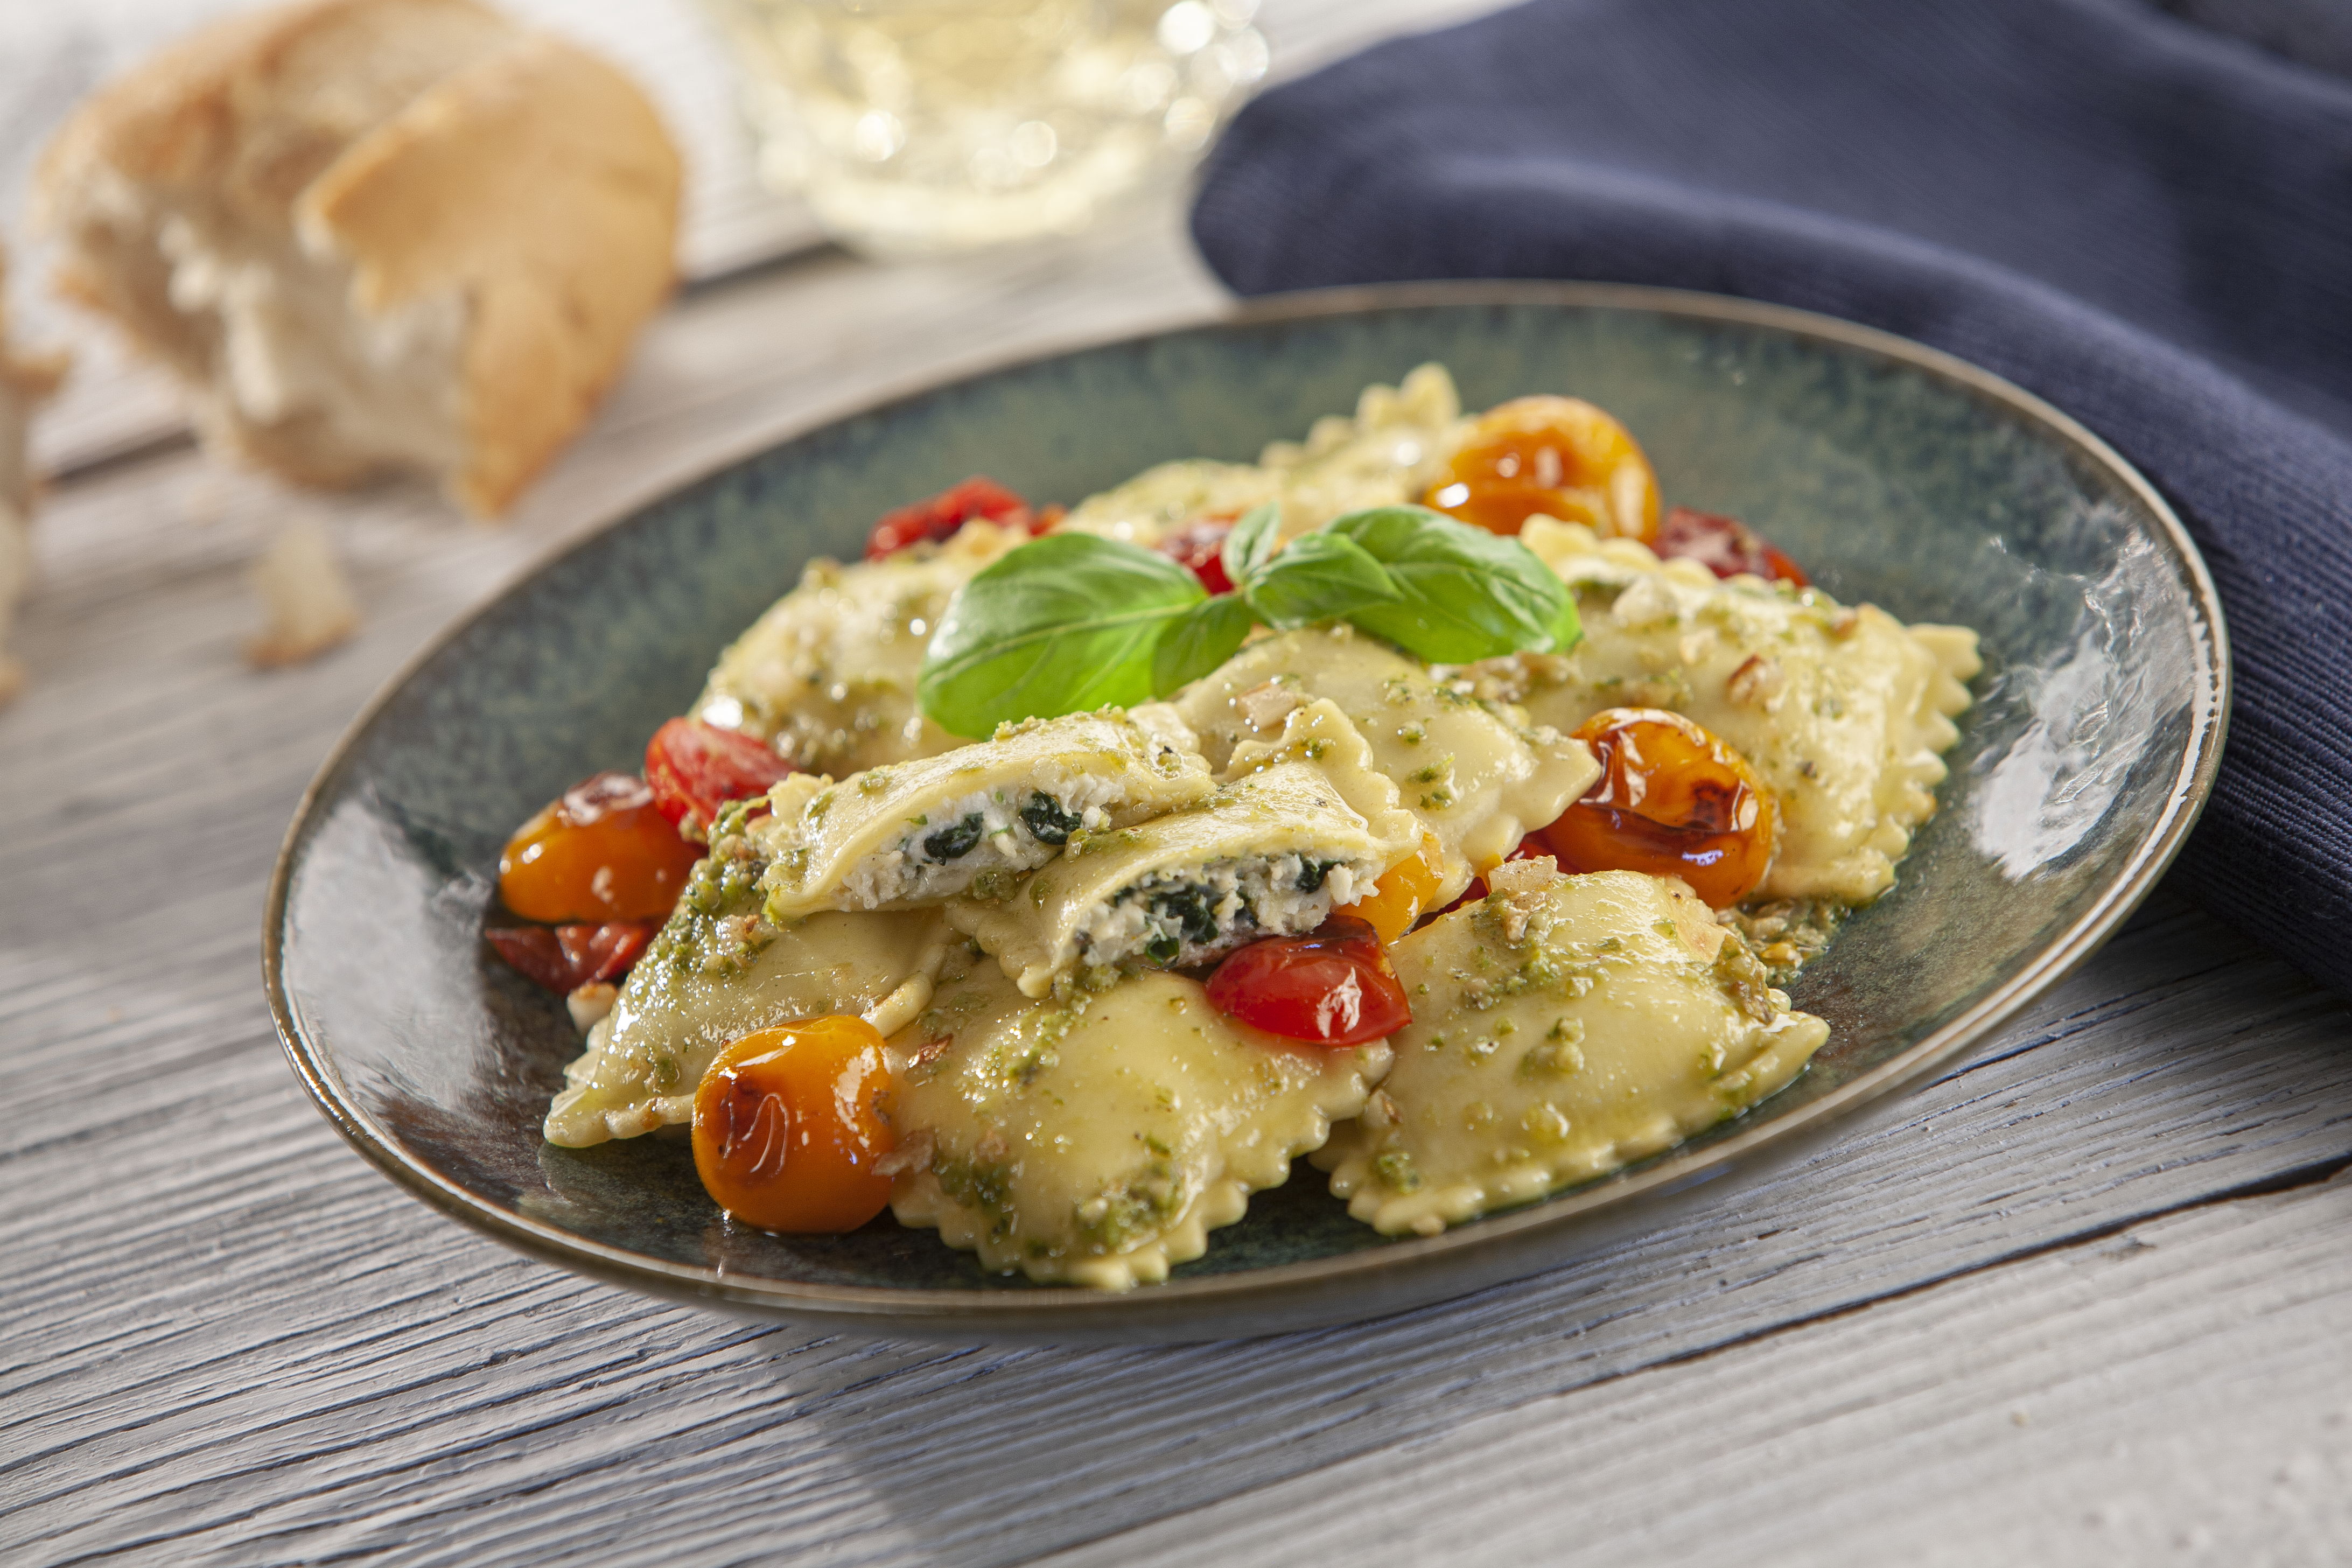 Spinach and Cheese Ravioli